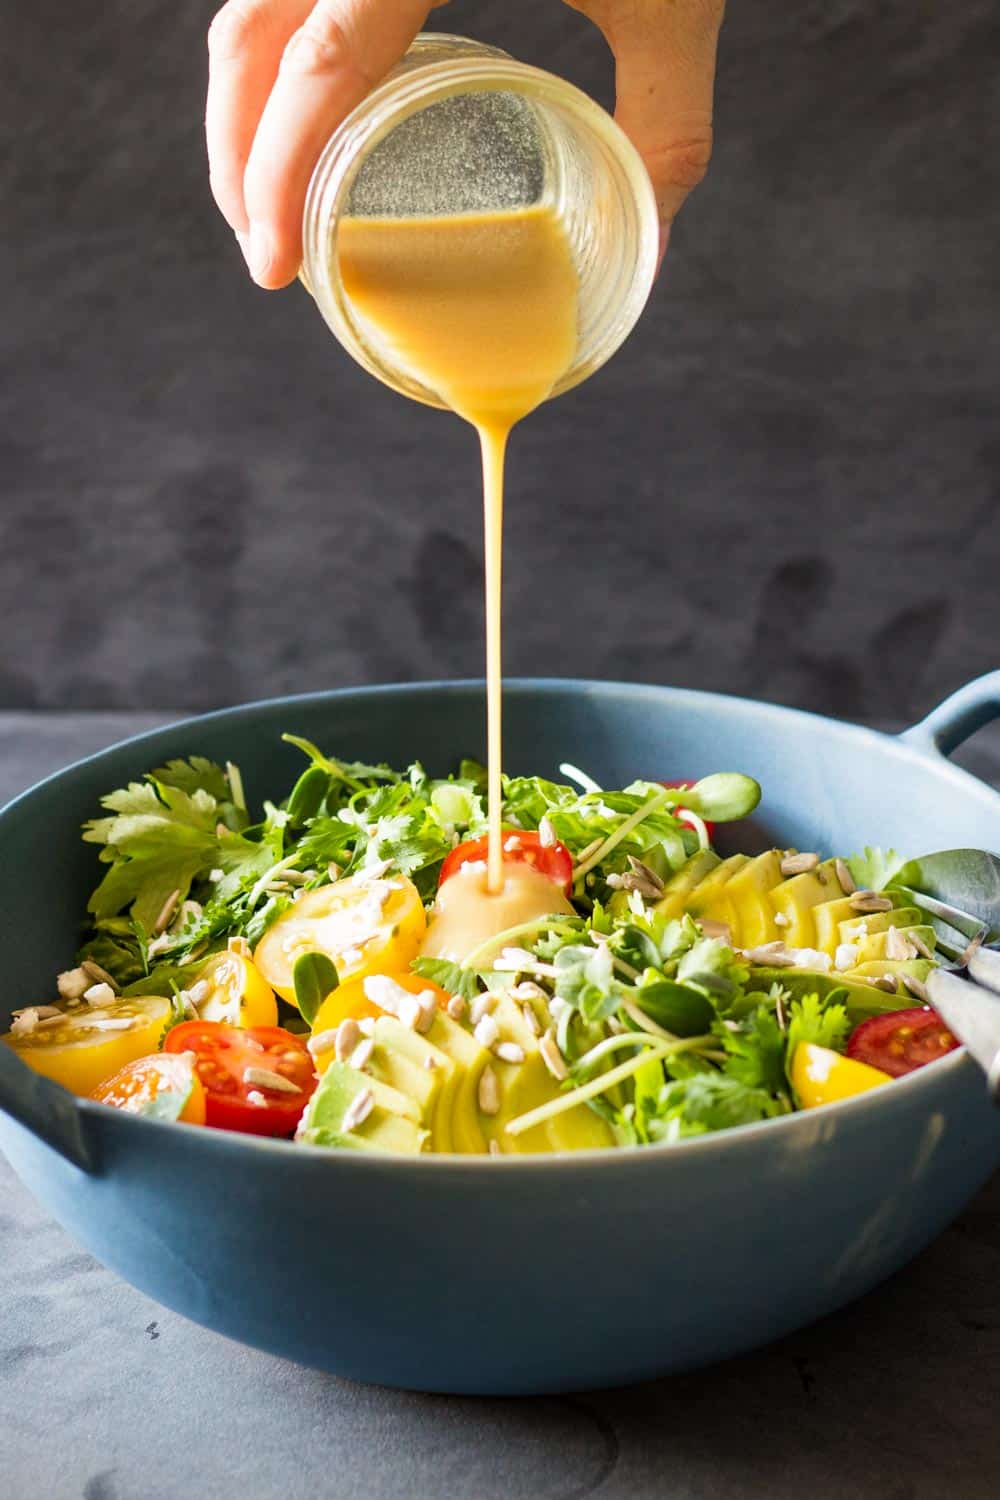 Honey lime dressing being poured over Mexican-Style Side Salad in a blue bowl.